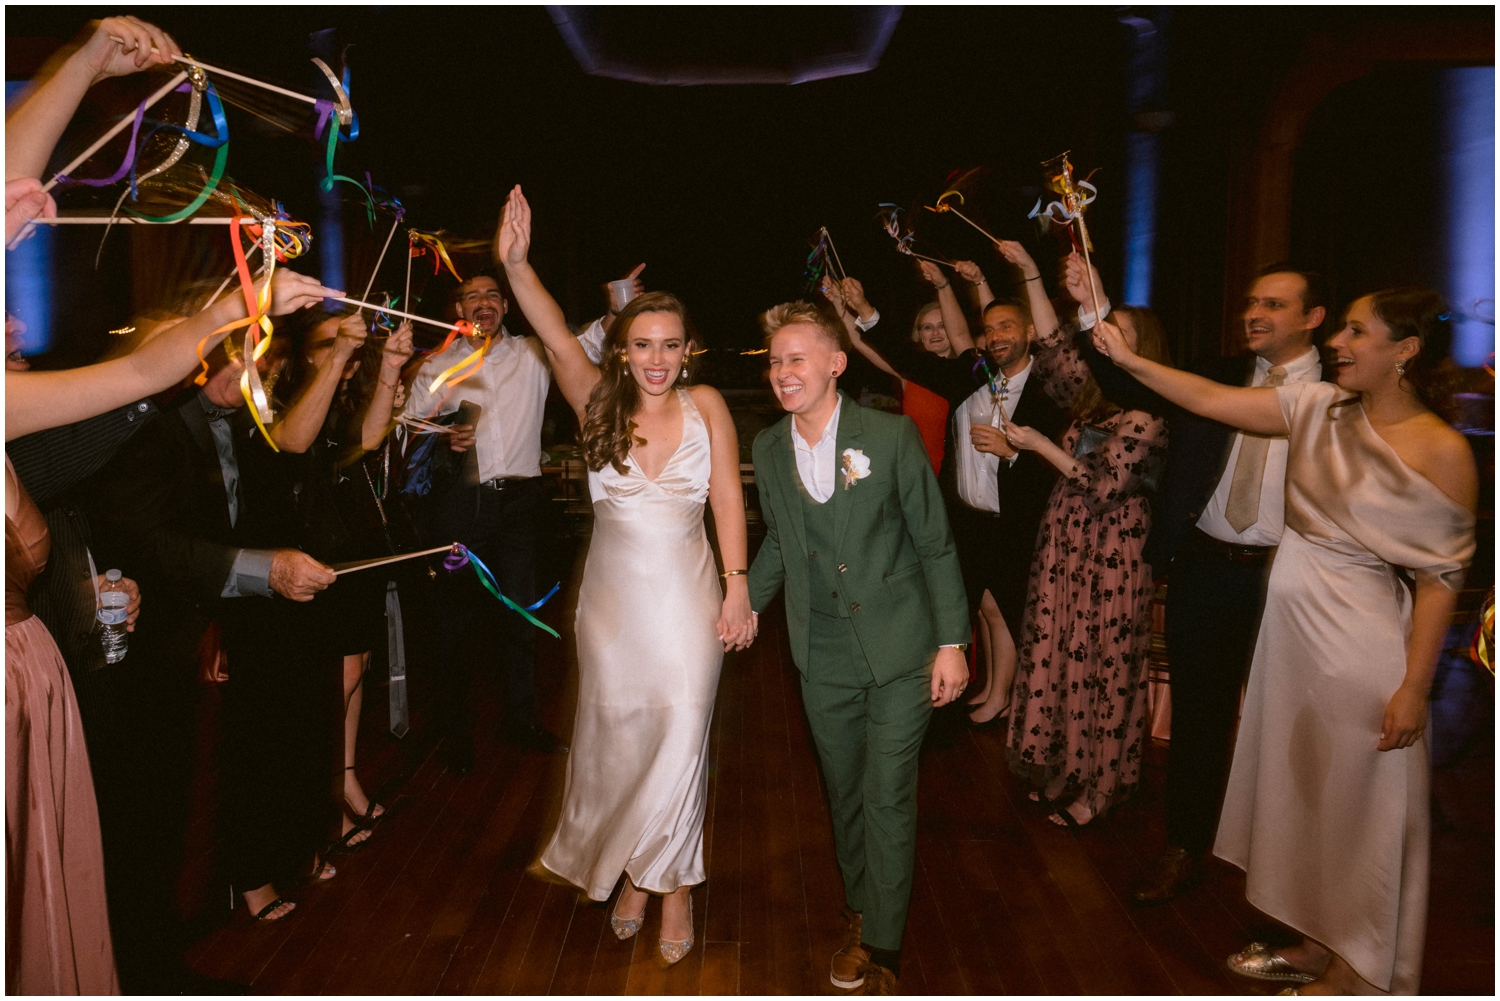 Han and Alyssa walk between lines of guests waving streamers for their wedding exit.